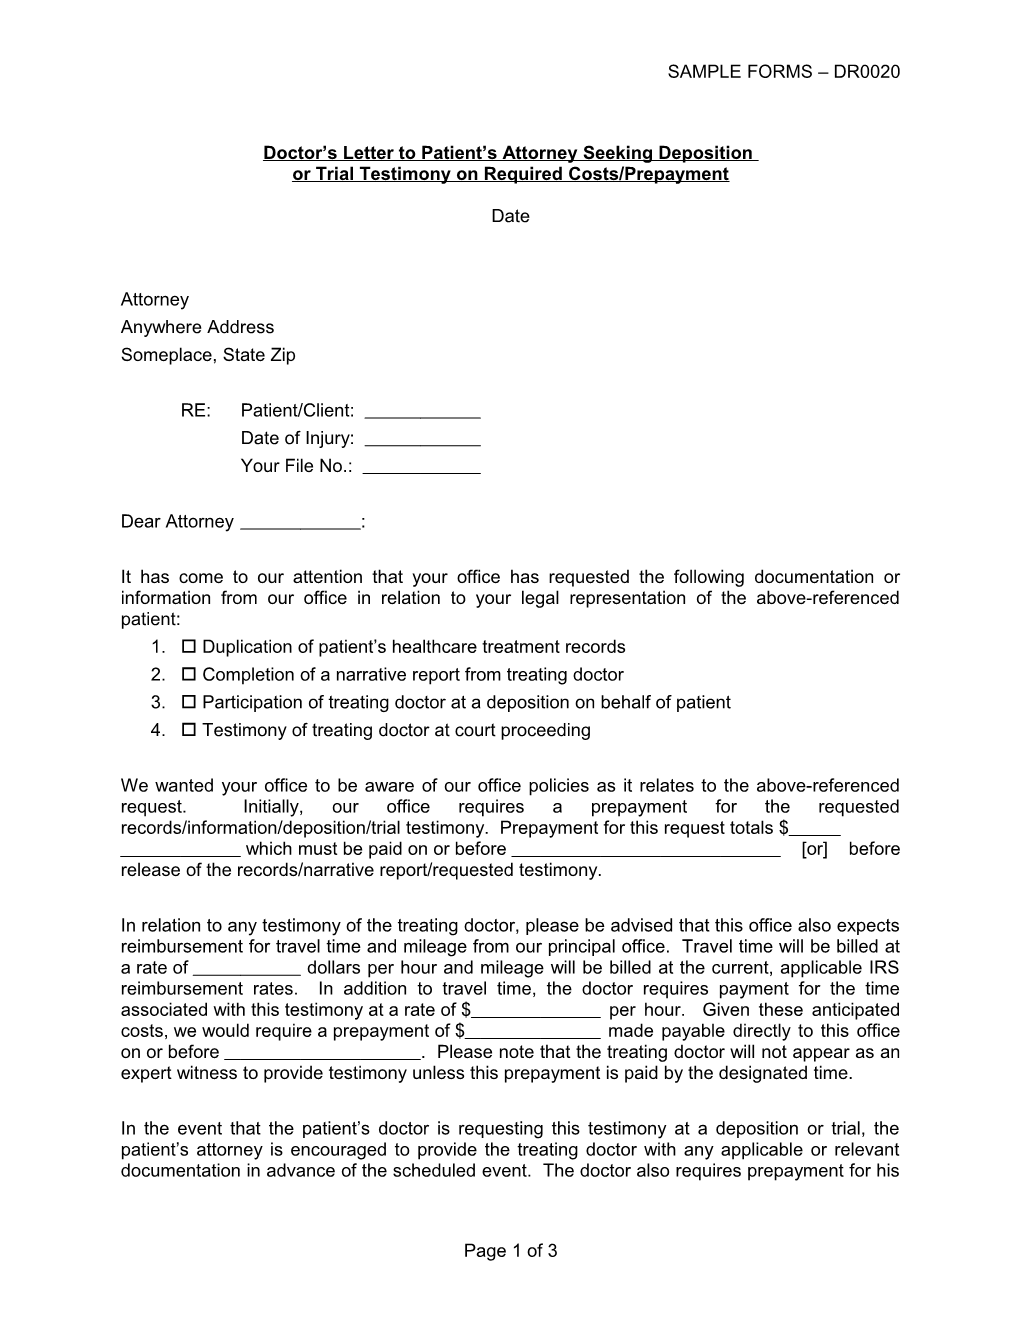 Doctor S Letter to Patient S Attorney Seeking Deposition